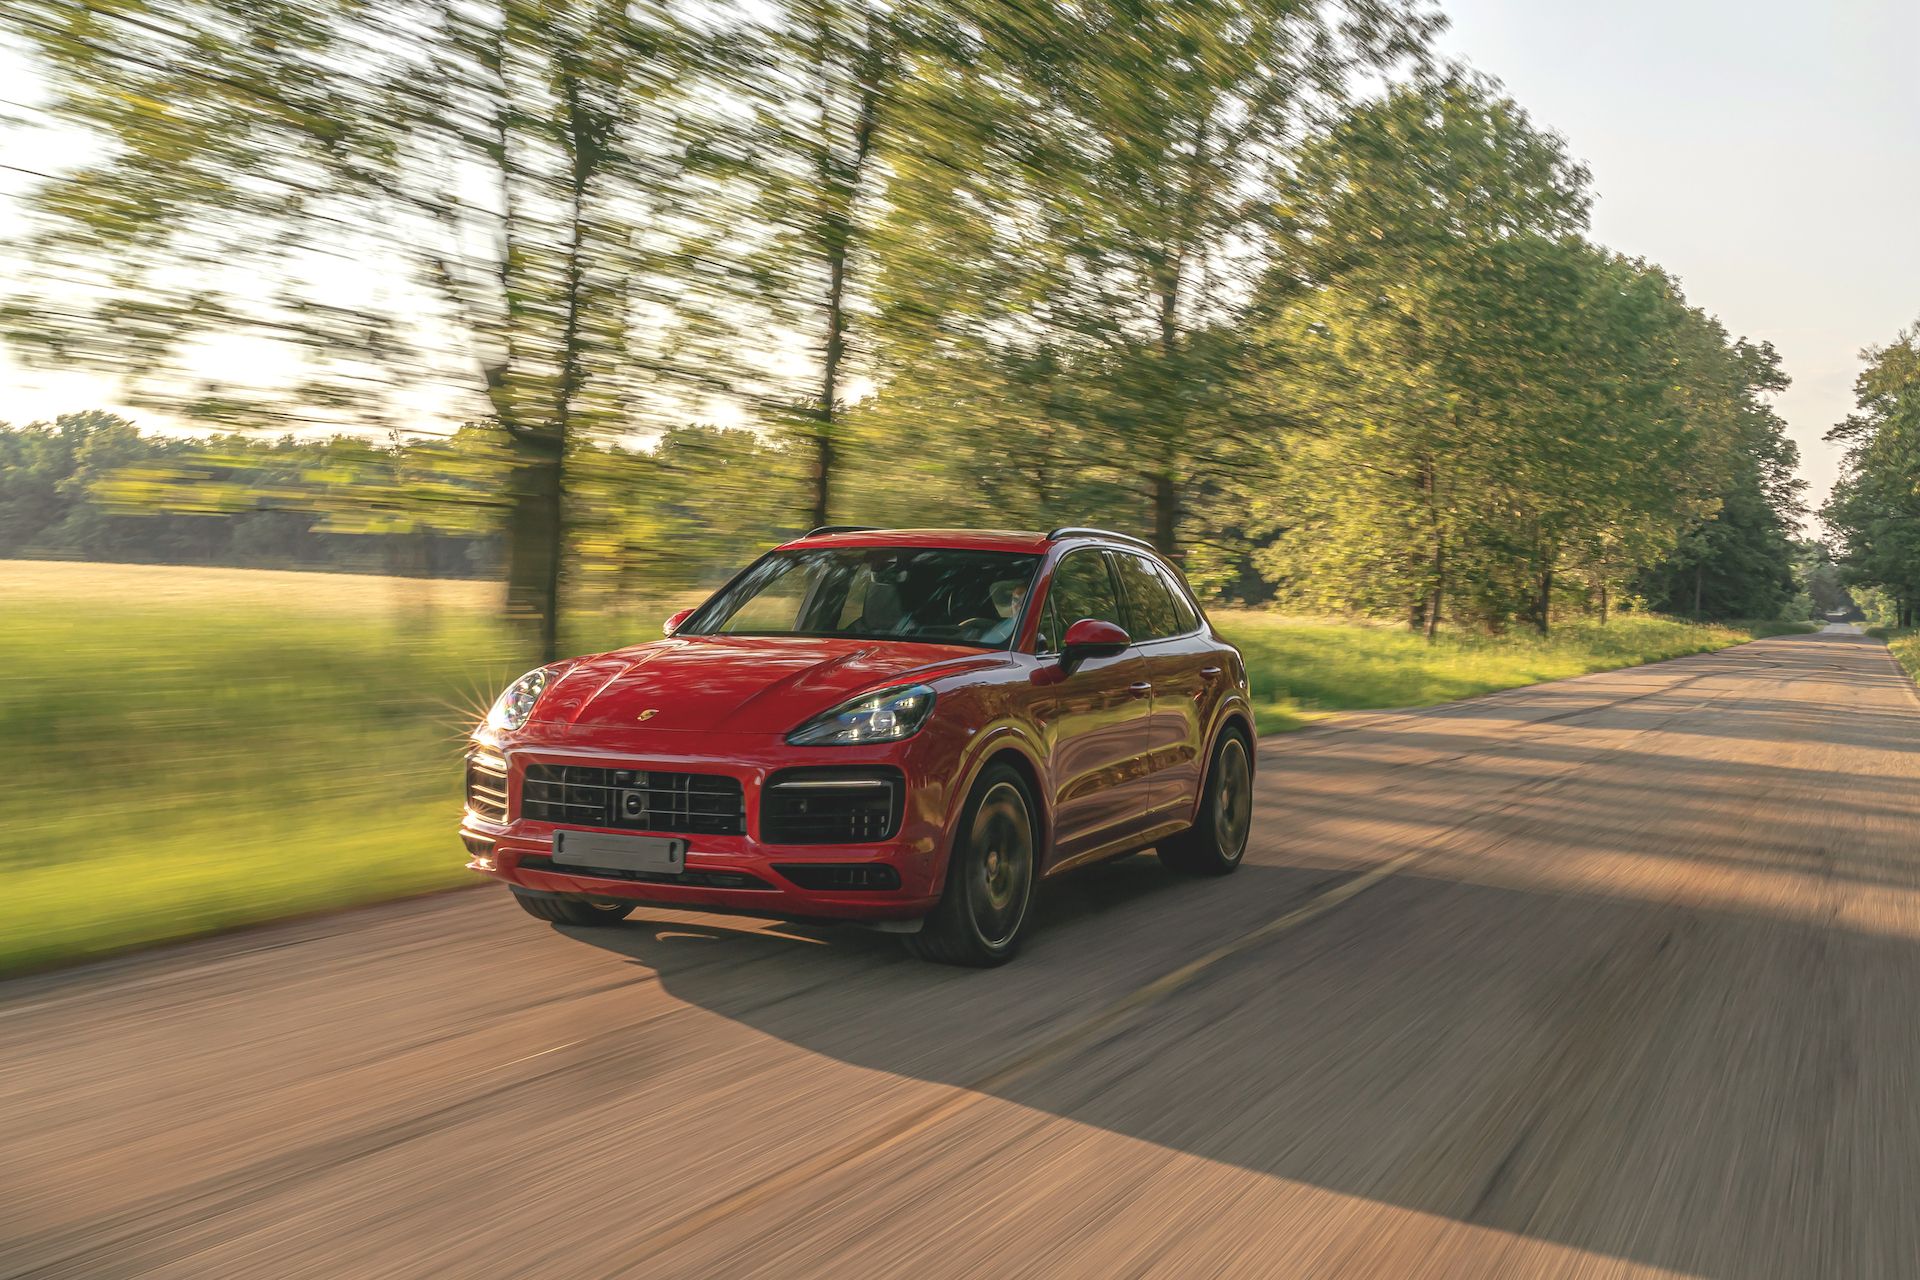 Porsche Cayenne Review, Ratings, Specs, Prices, and Photo Car Connection